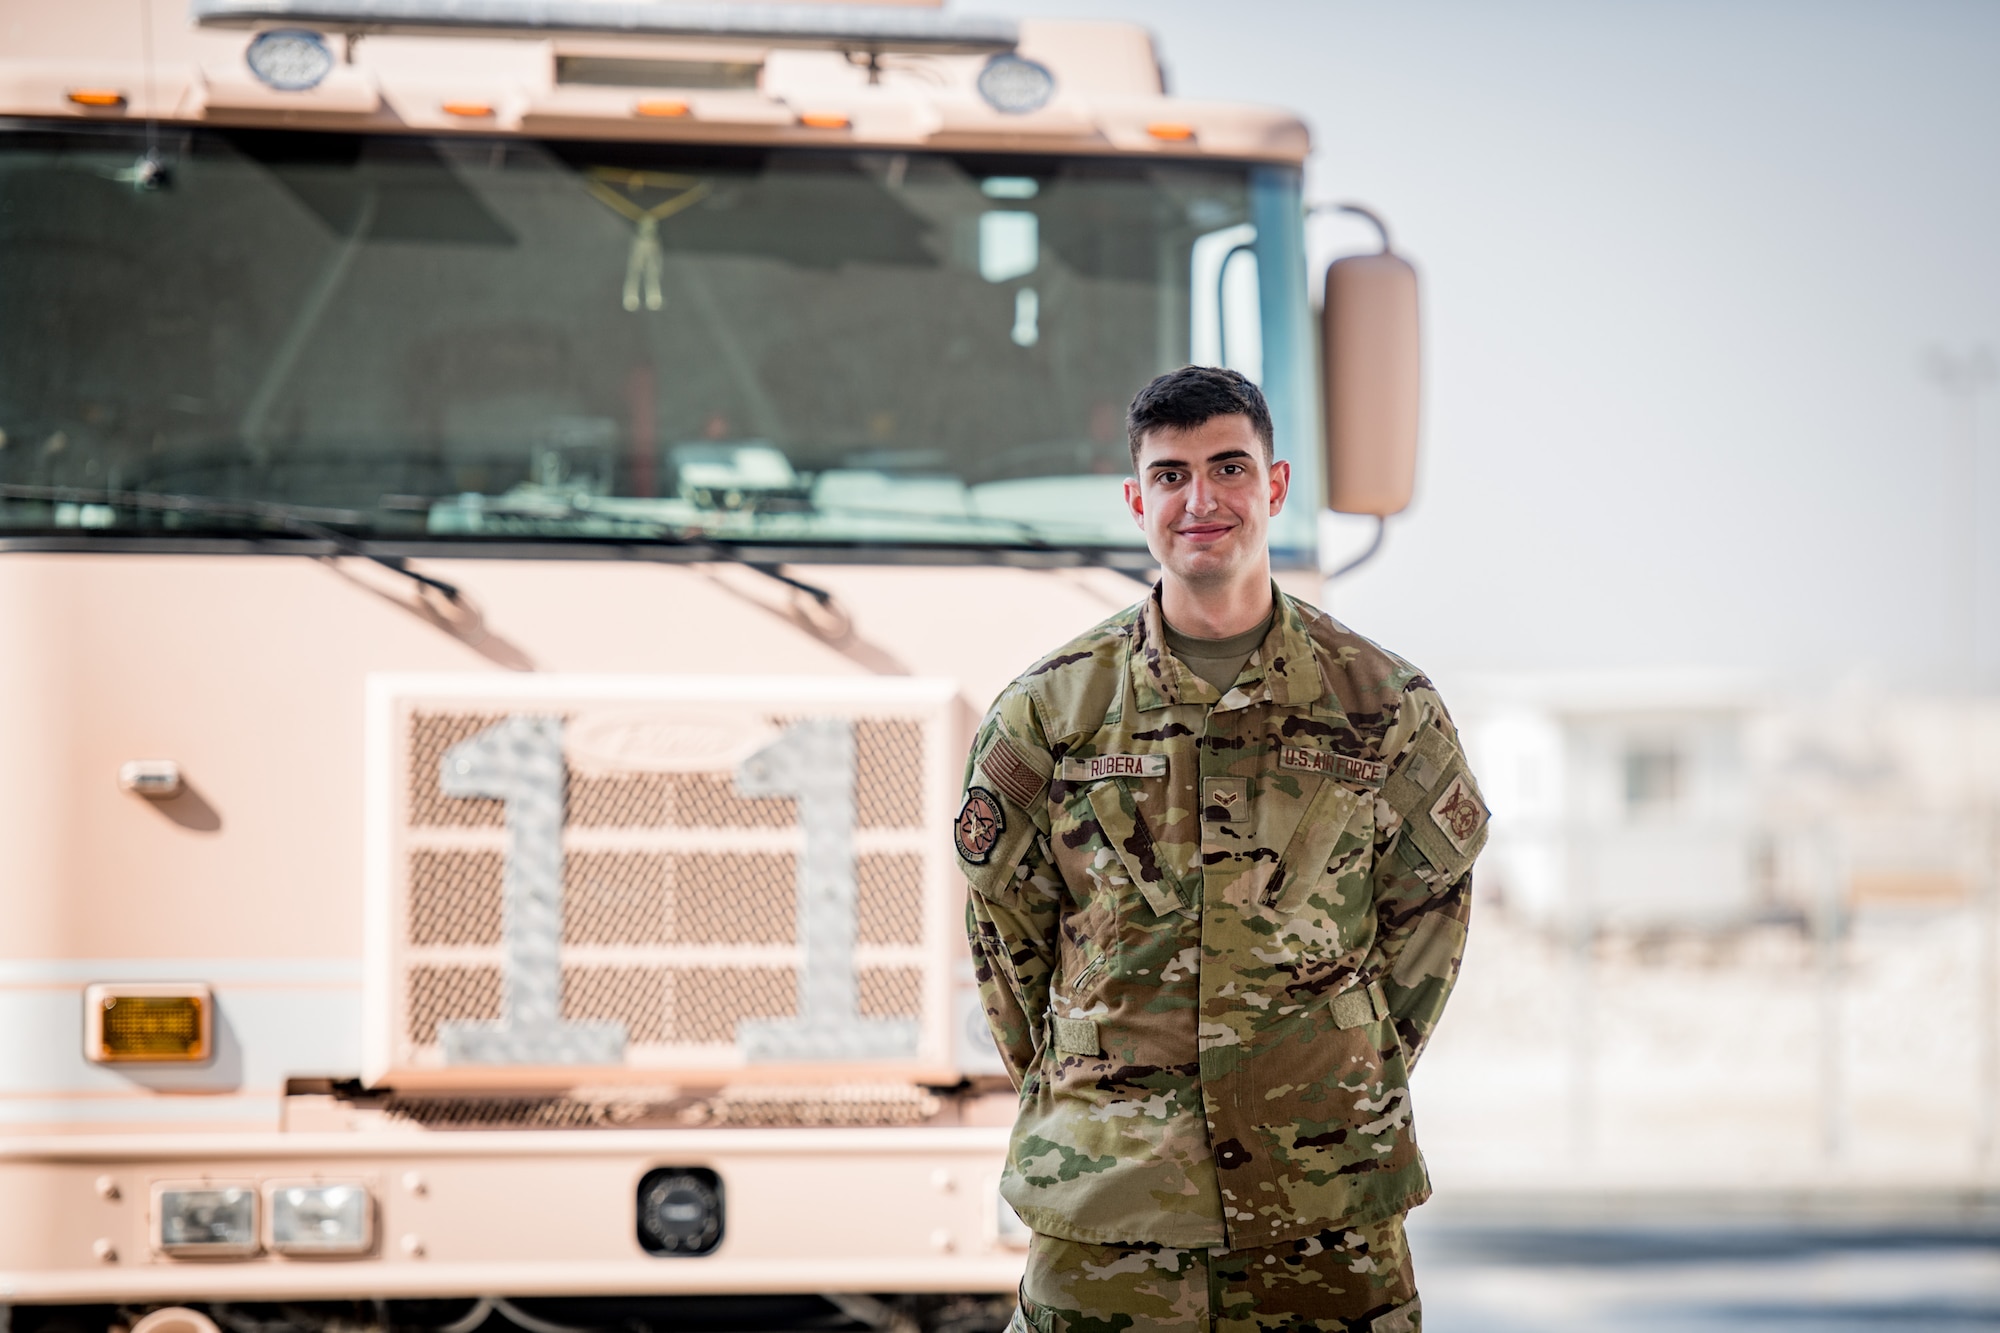 An airman poses for a photo in font of a firetruck